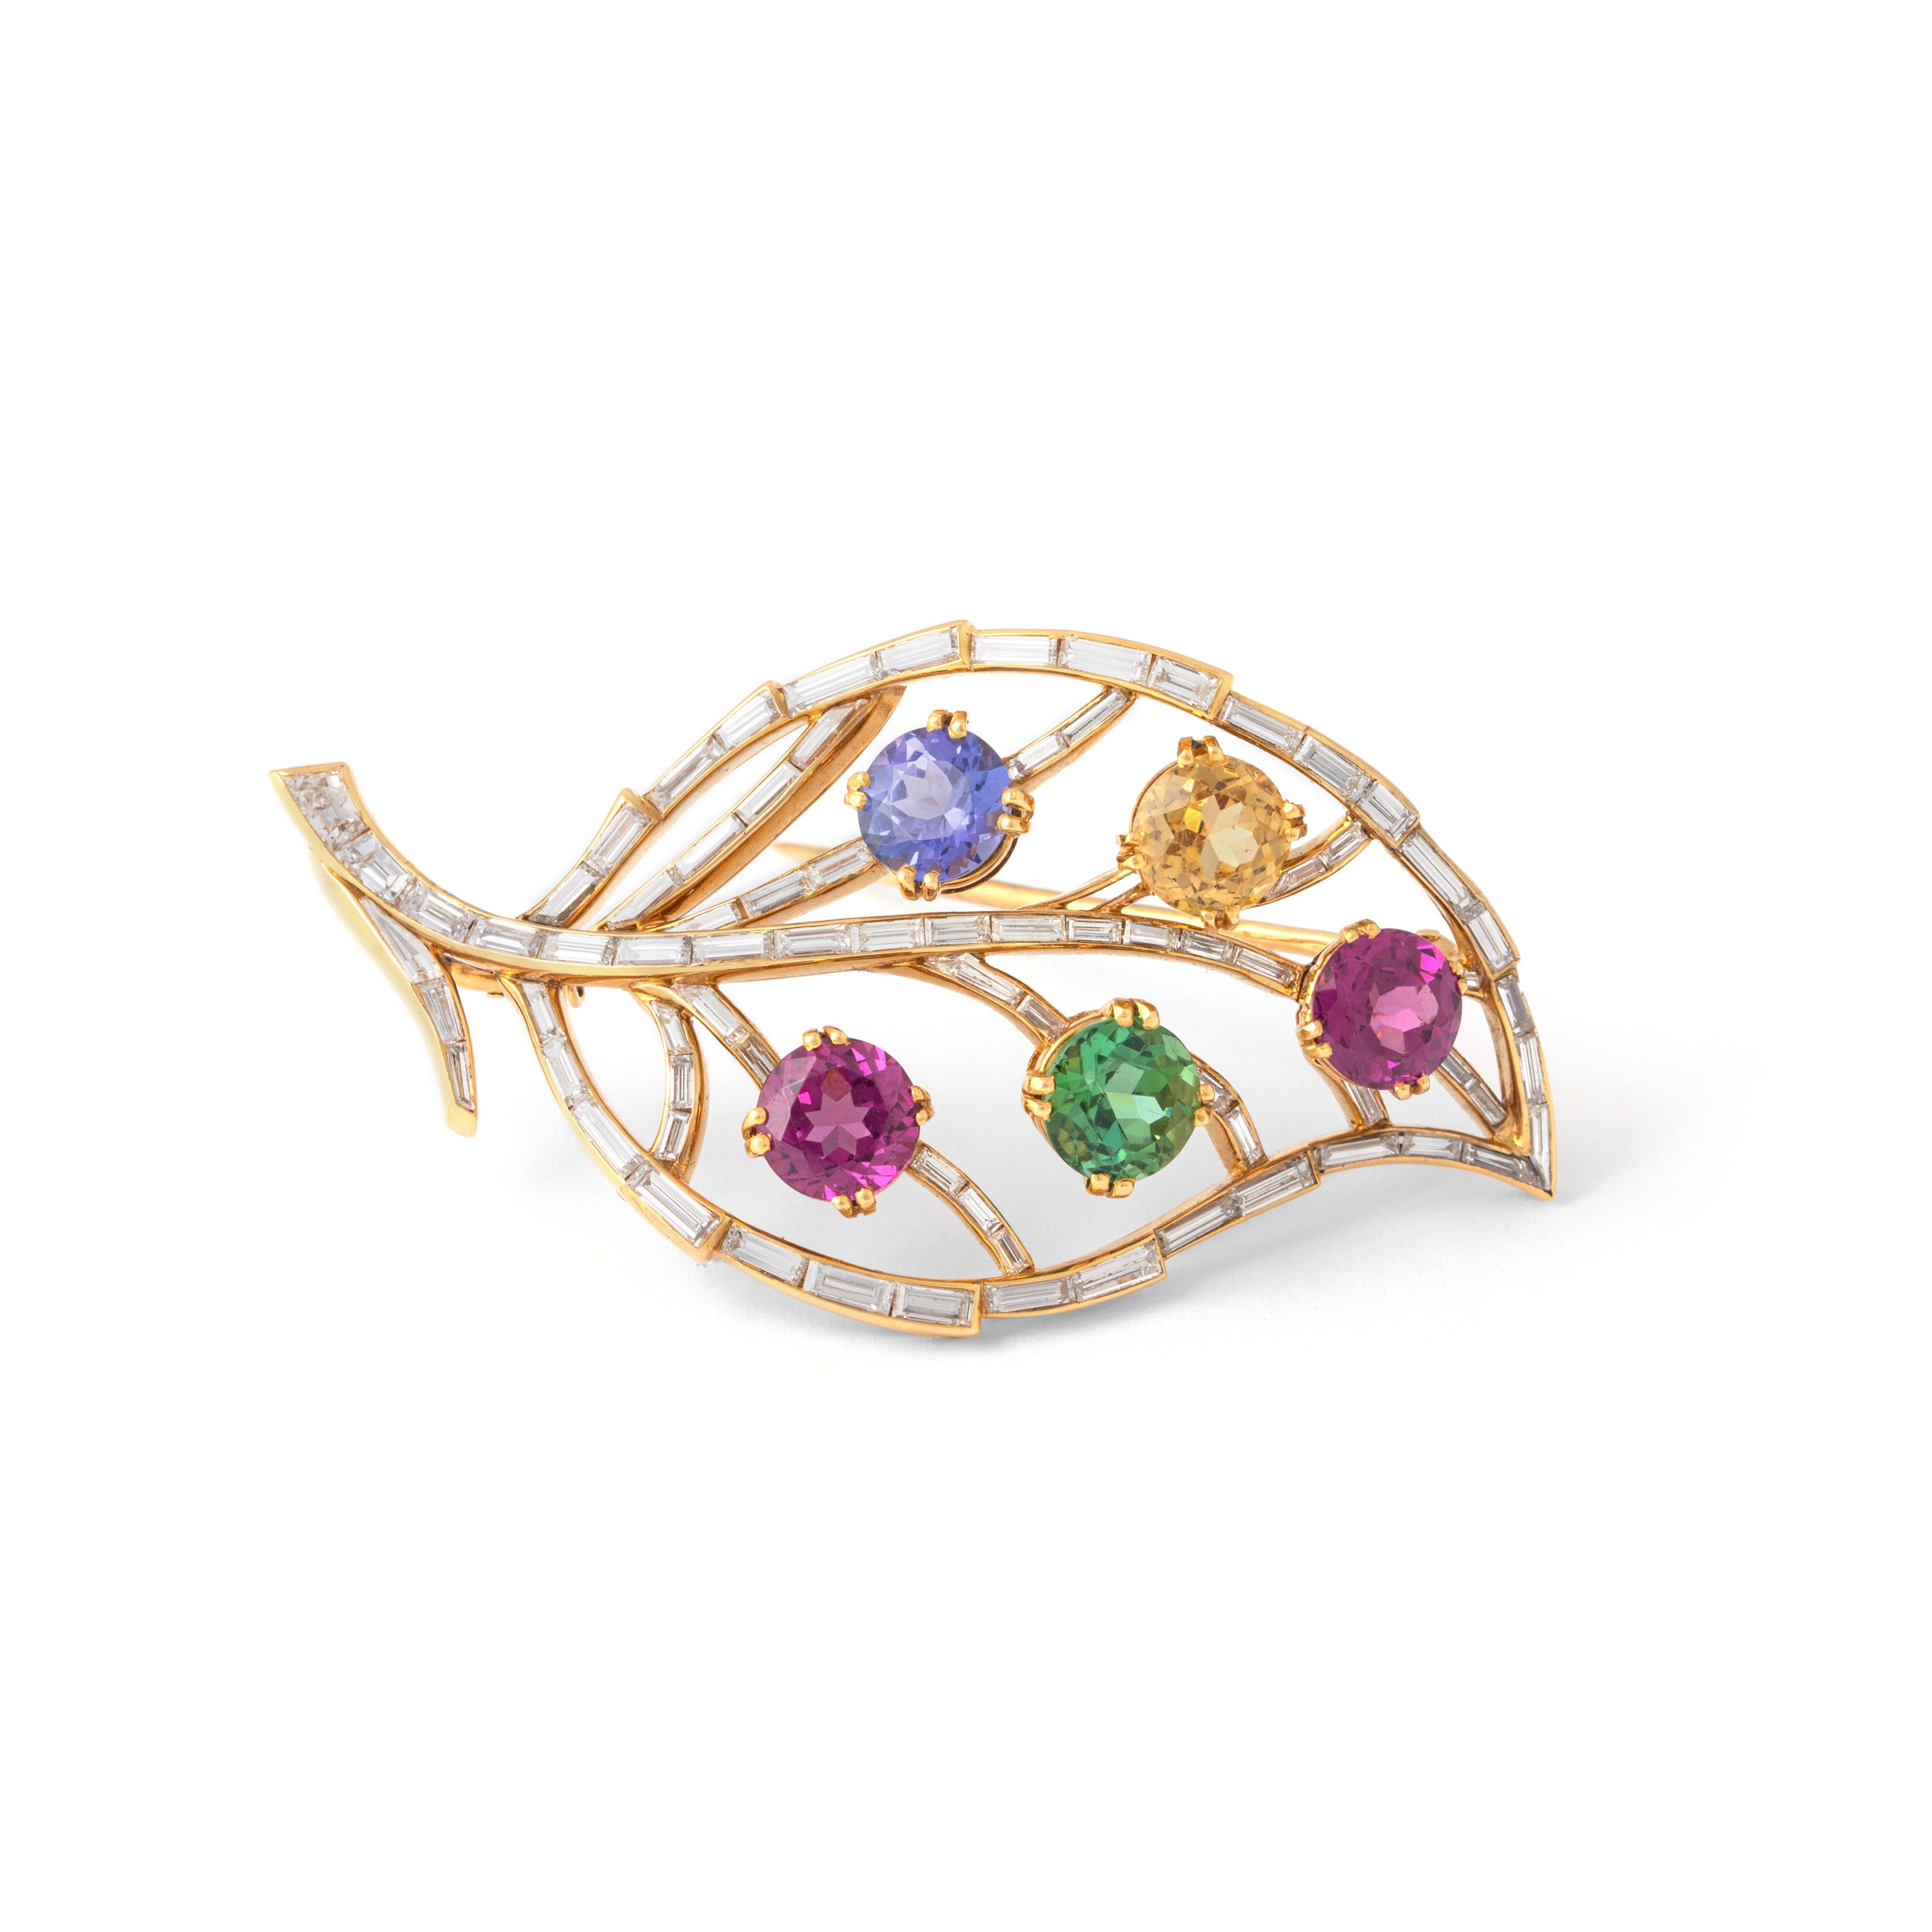 Diamond and gemstones set on gold and platinum Brooch representing a leaf.
74 baguette cut diamonds. Total approximately 7.00 carats.
5 gemstones. Total approximately 5.00 carats.

Total length: 6.00 centimeters.
Total weight: 18.62 grams.
Width: